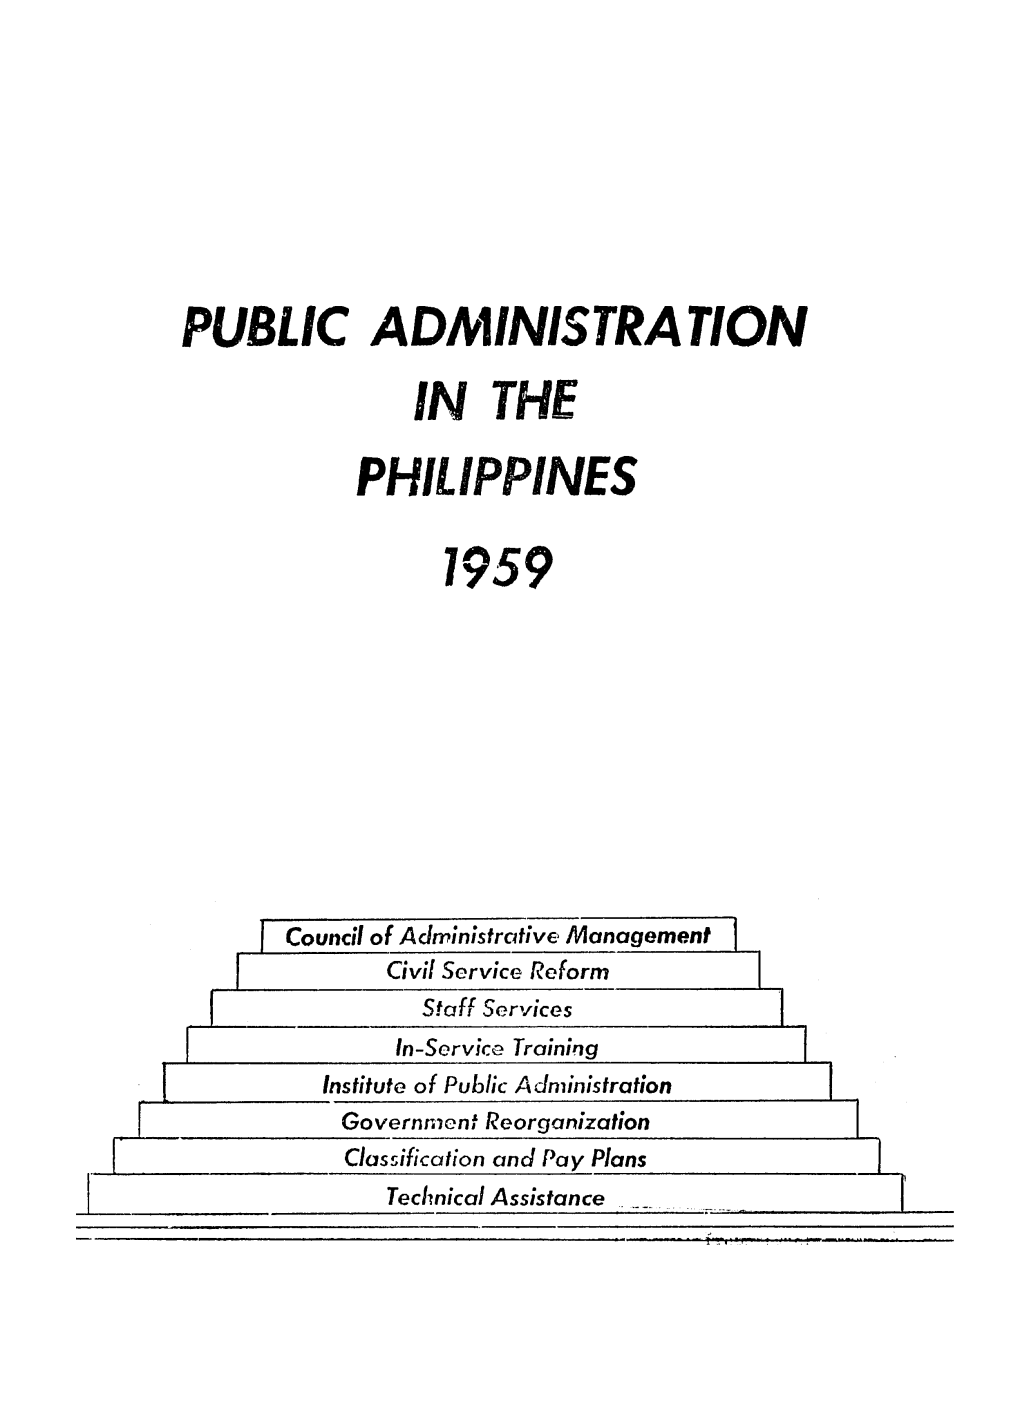 Public Administration in the Philippines 1959